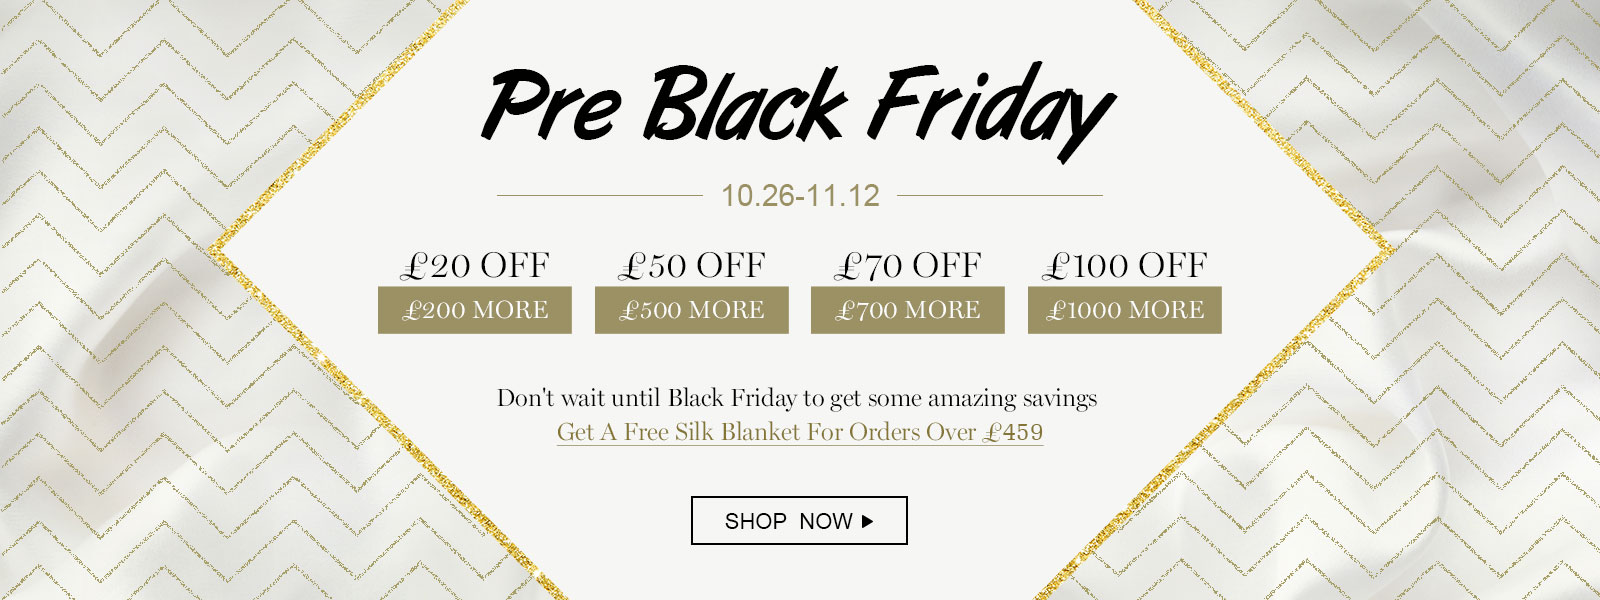 LilySilk LilySilk: Pre Black Friday up to £100 off silk pillowcases, bed linen, sleepwear and fashion clothes